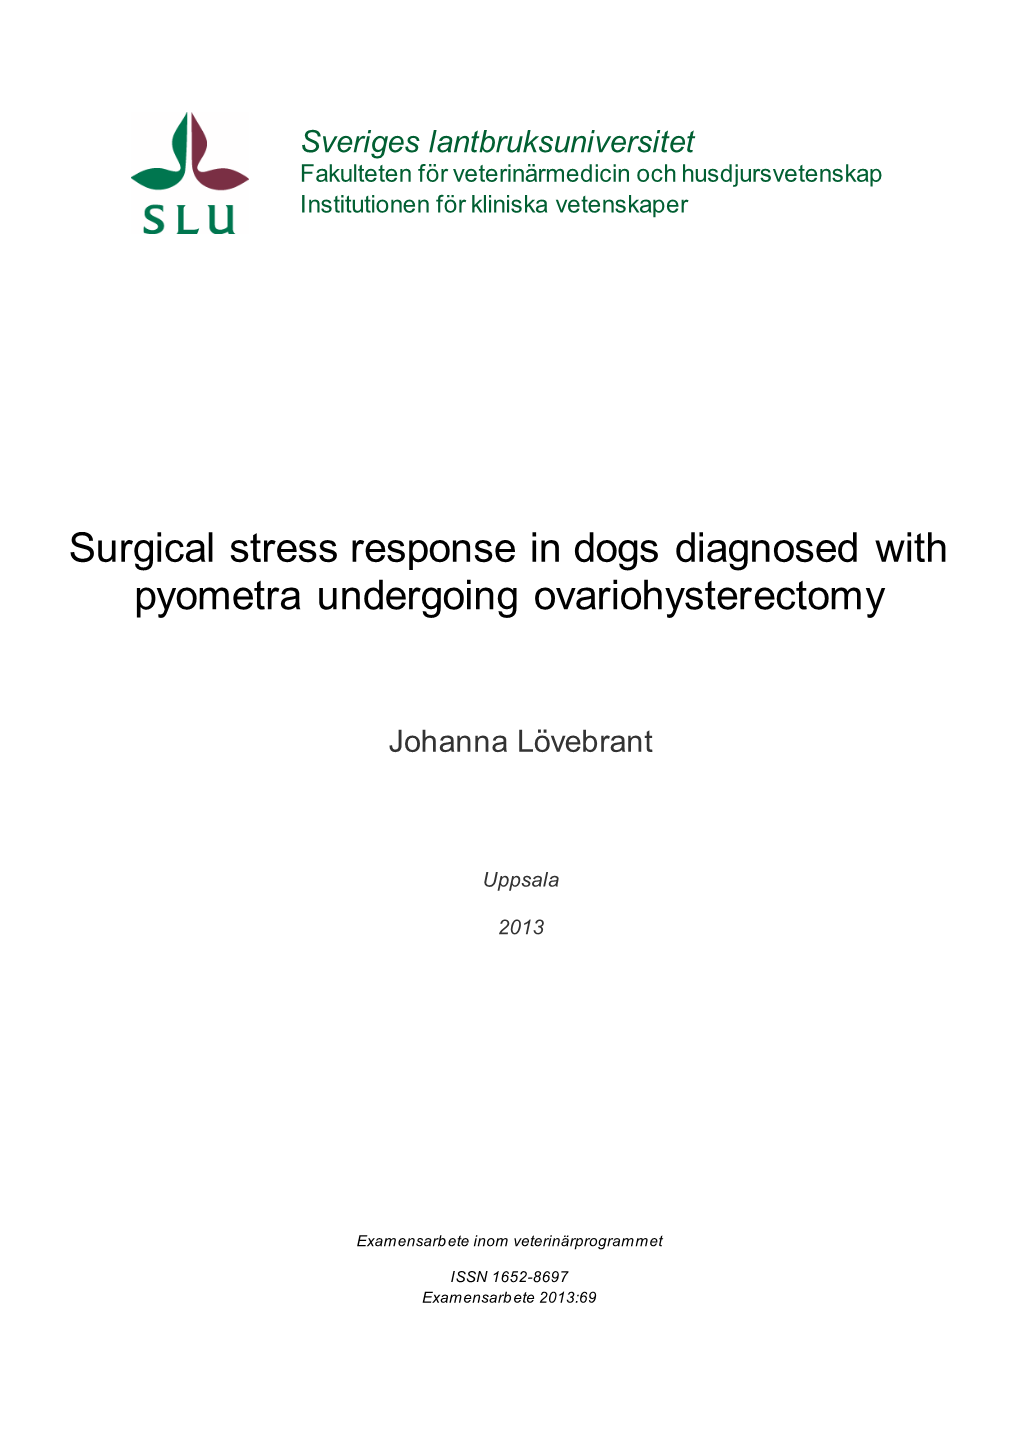 Surgical Stress Response in Dogs Diagnosed with Pyometra Undergoing Ovariohysterectomy